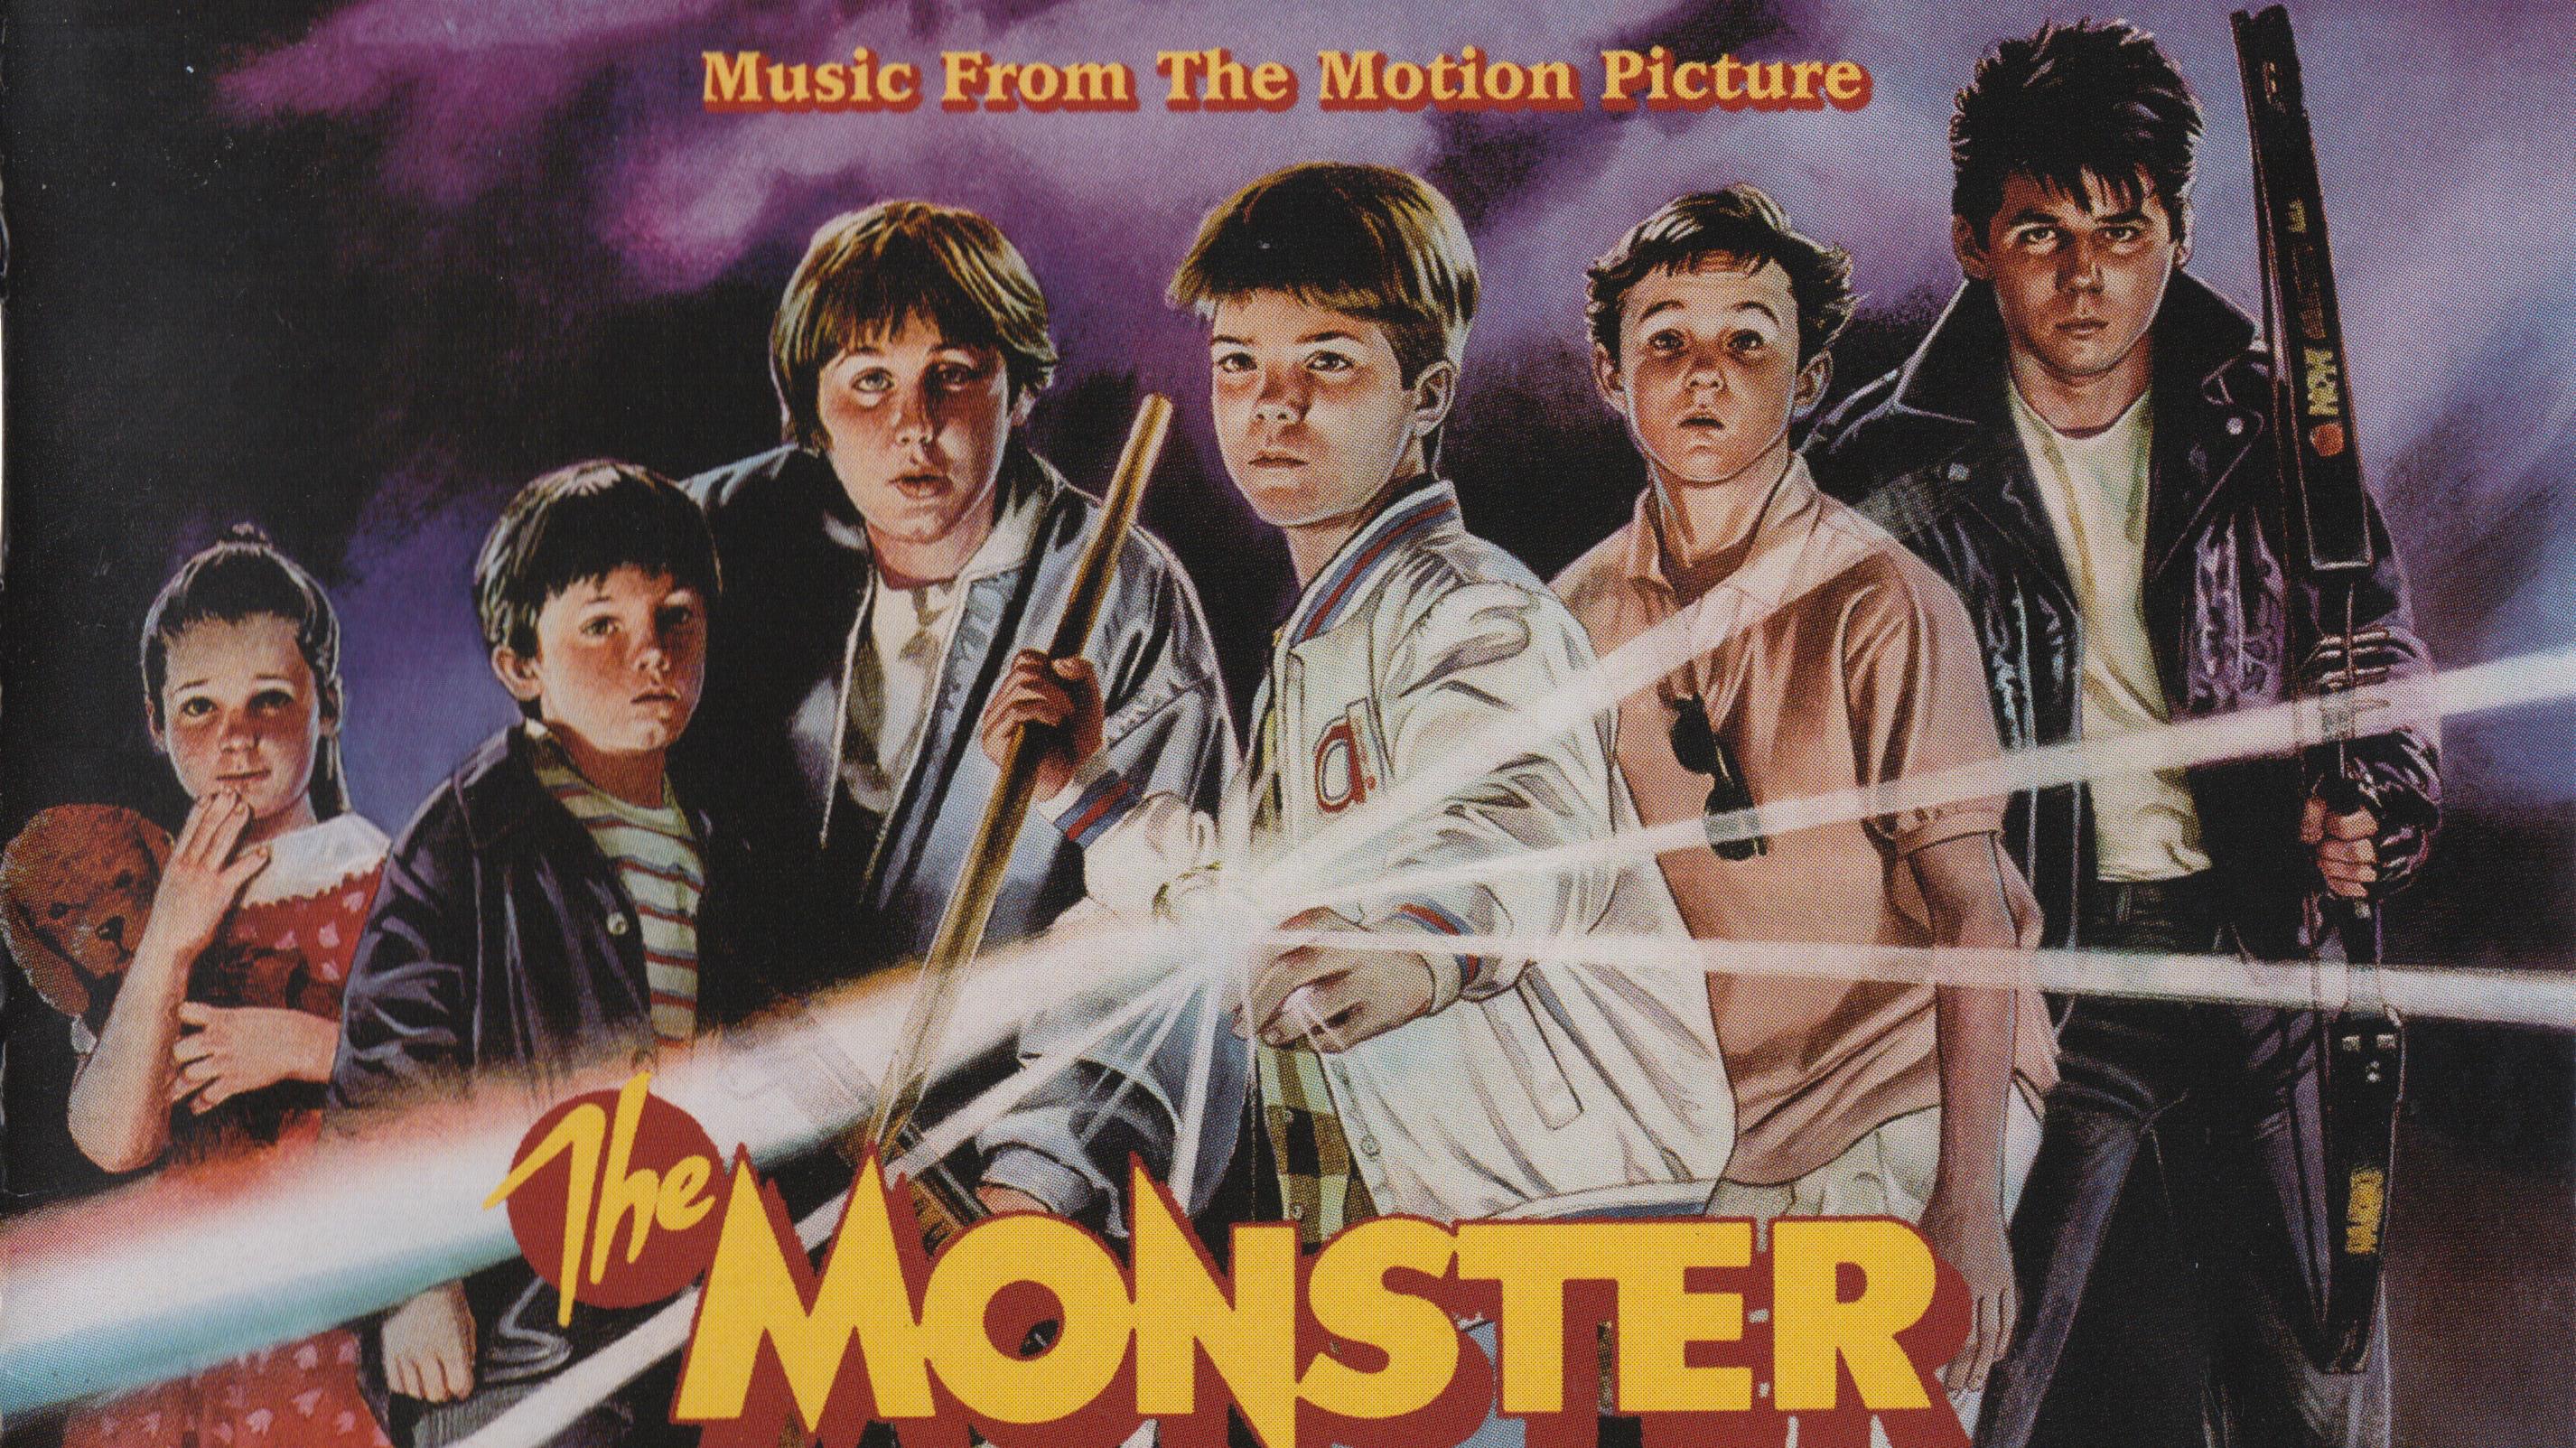 Movie The Monster Squad HD Wallpaper